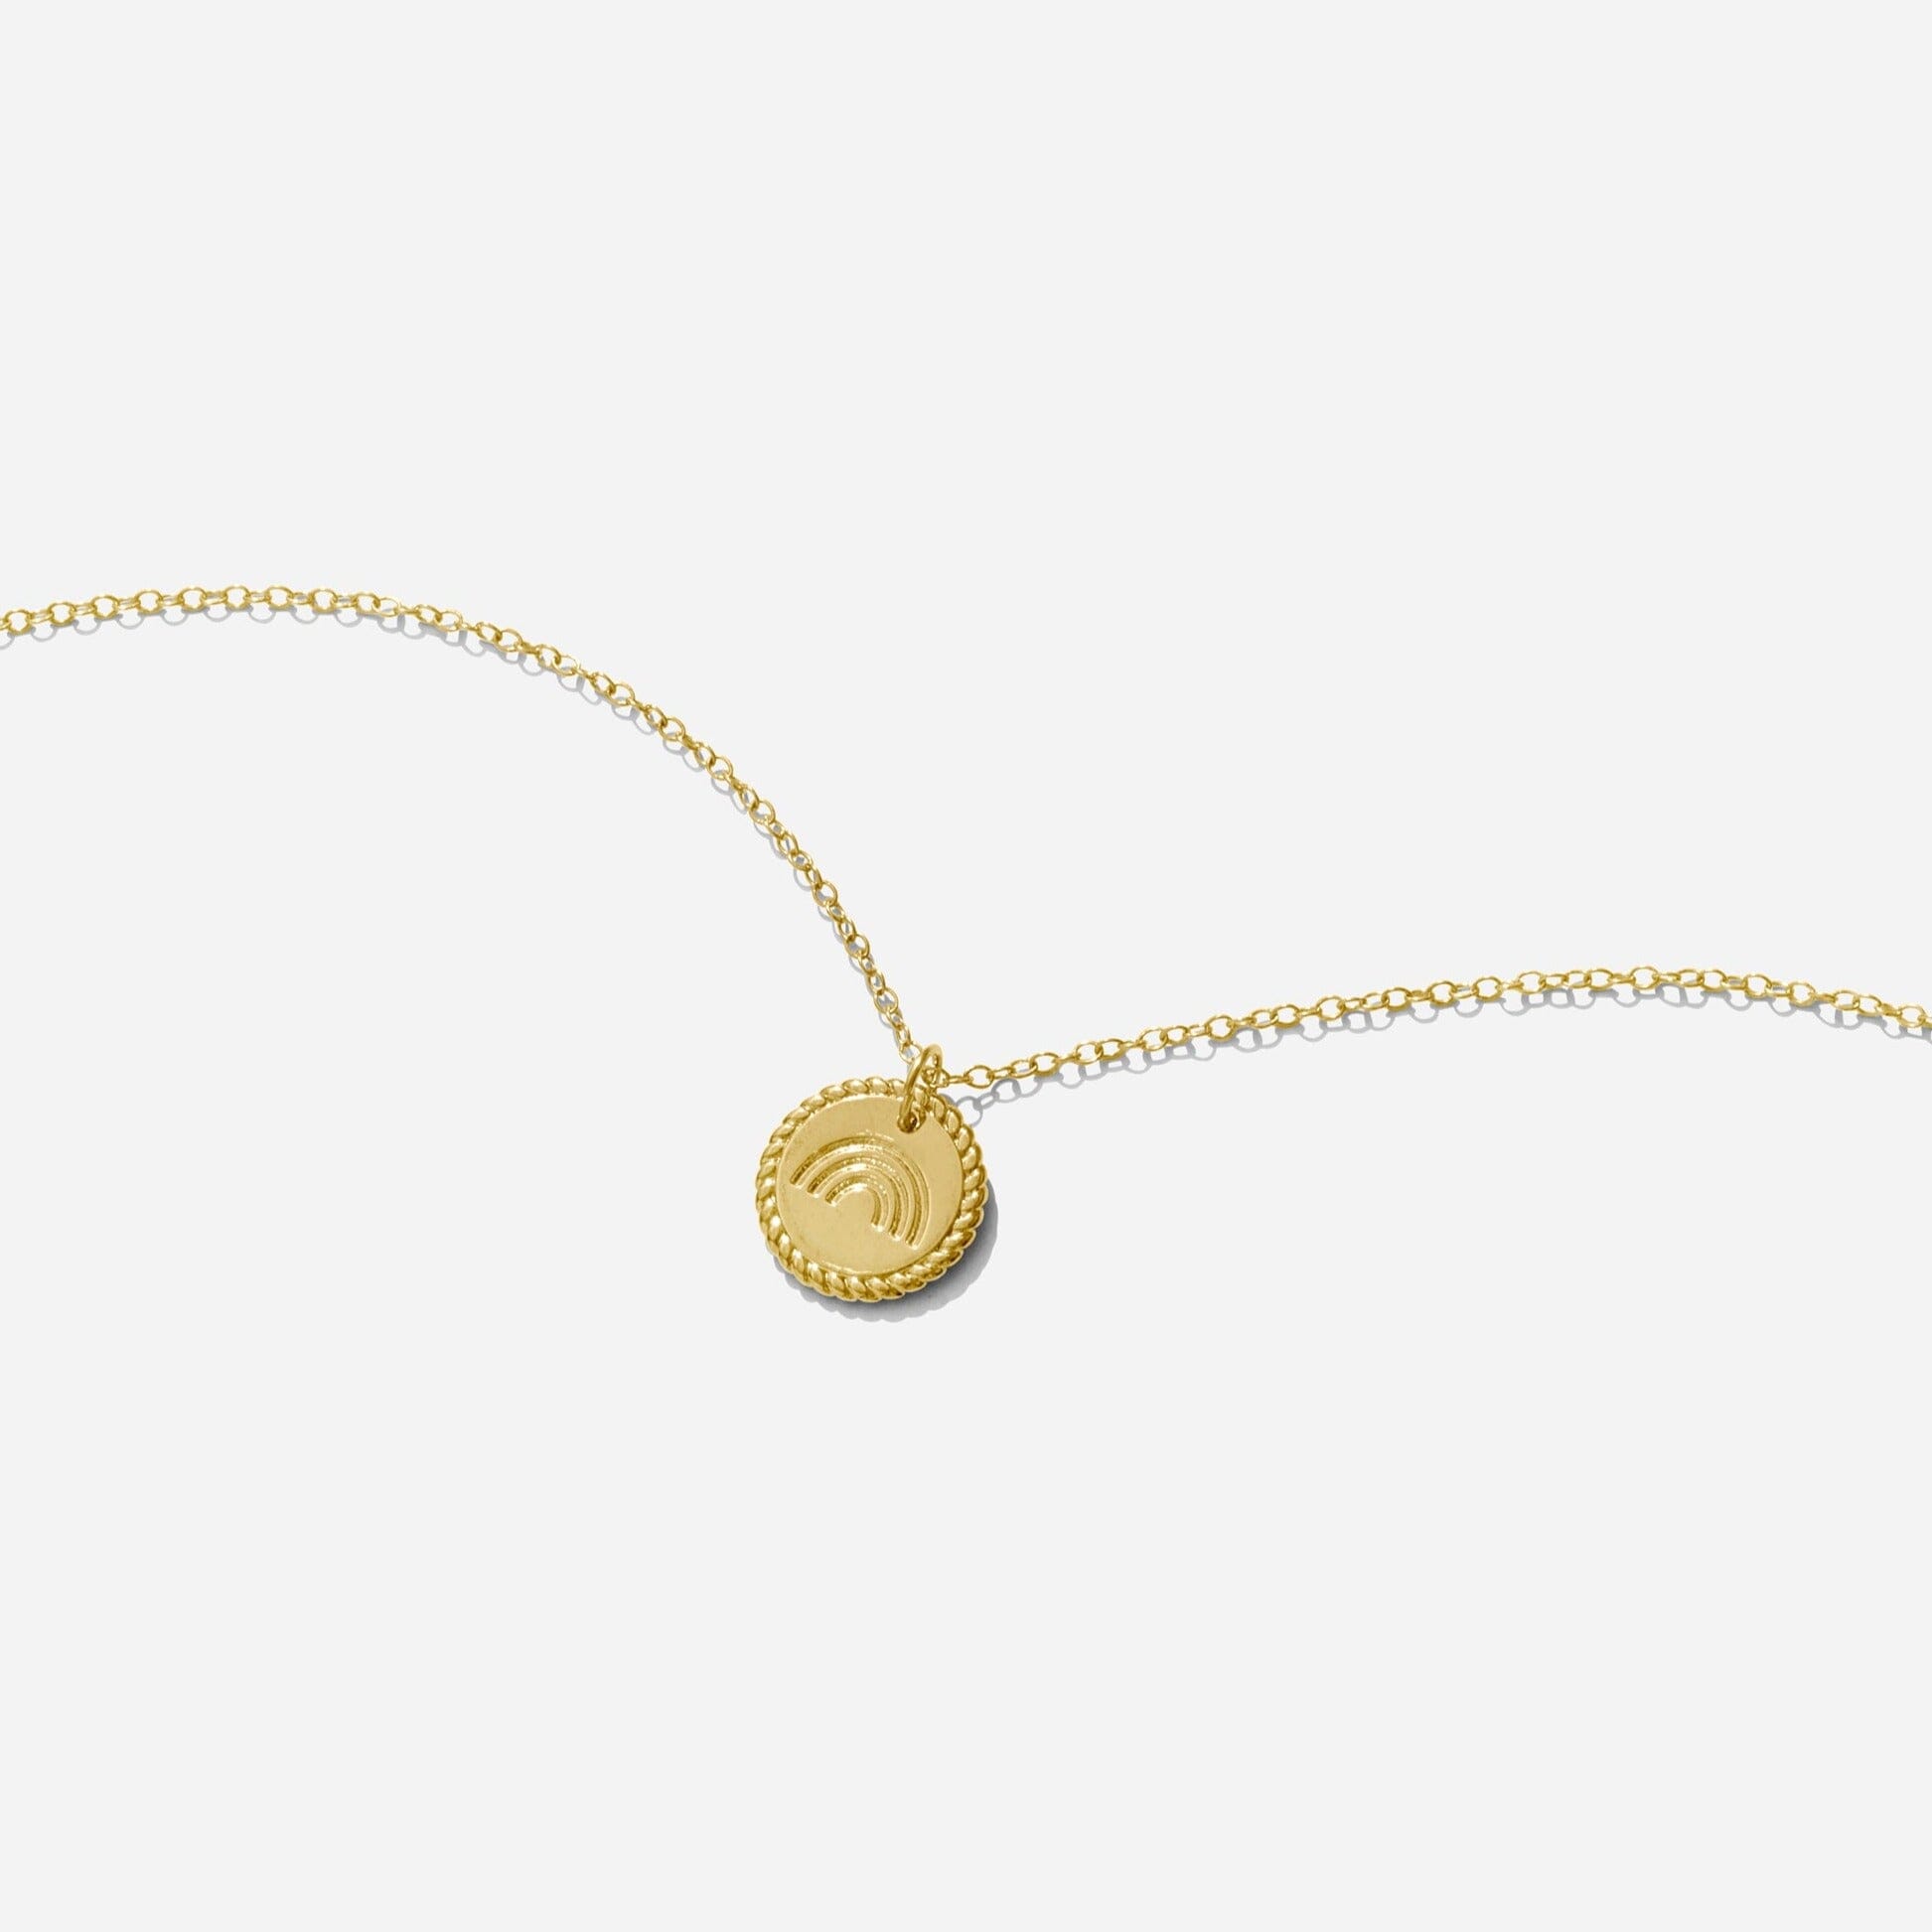 Gold Rainbow Necklace handmade in America by Katie Dean Jewelry, as seen on a natural white background, perfect for the dainty minimal jewelry lovers.